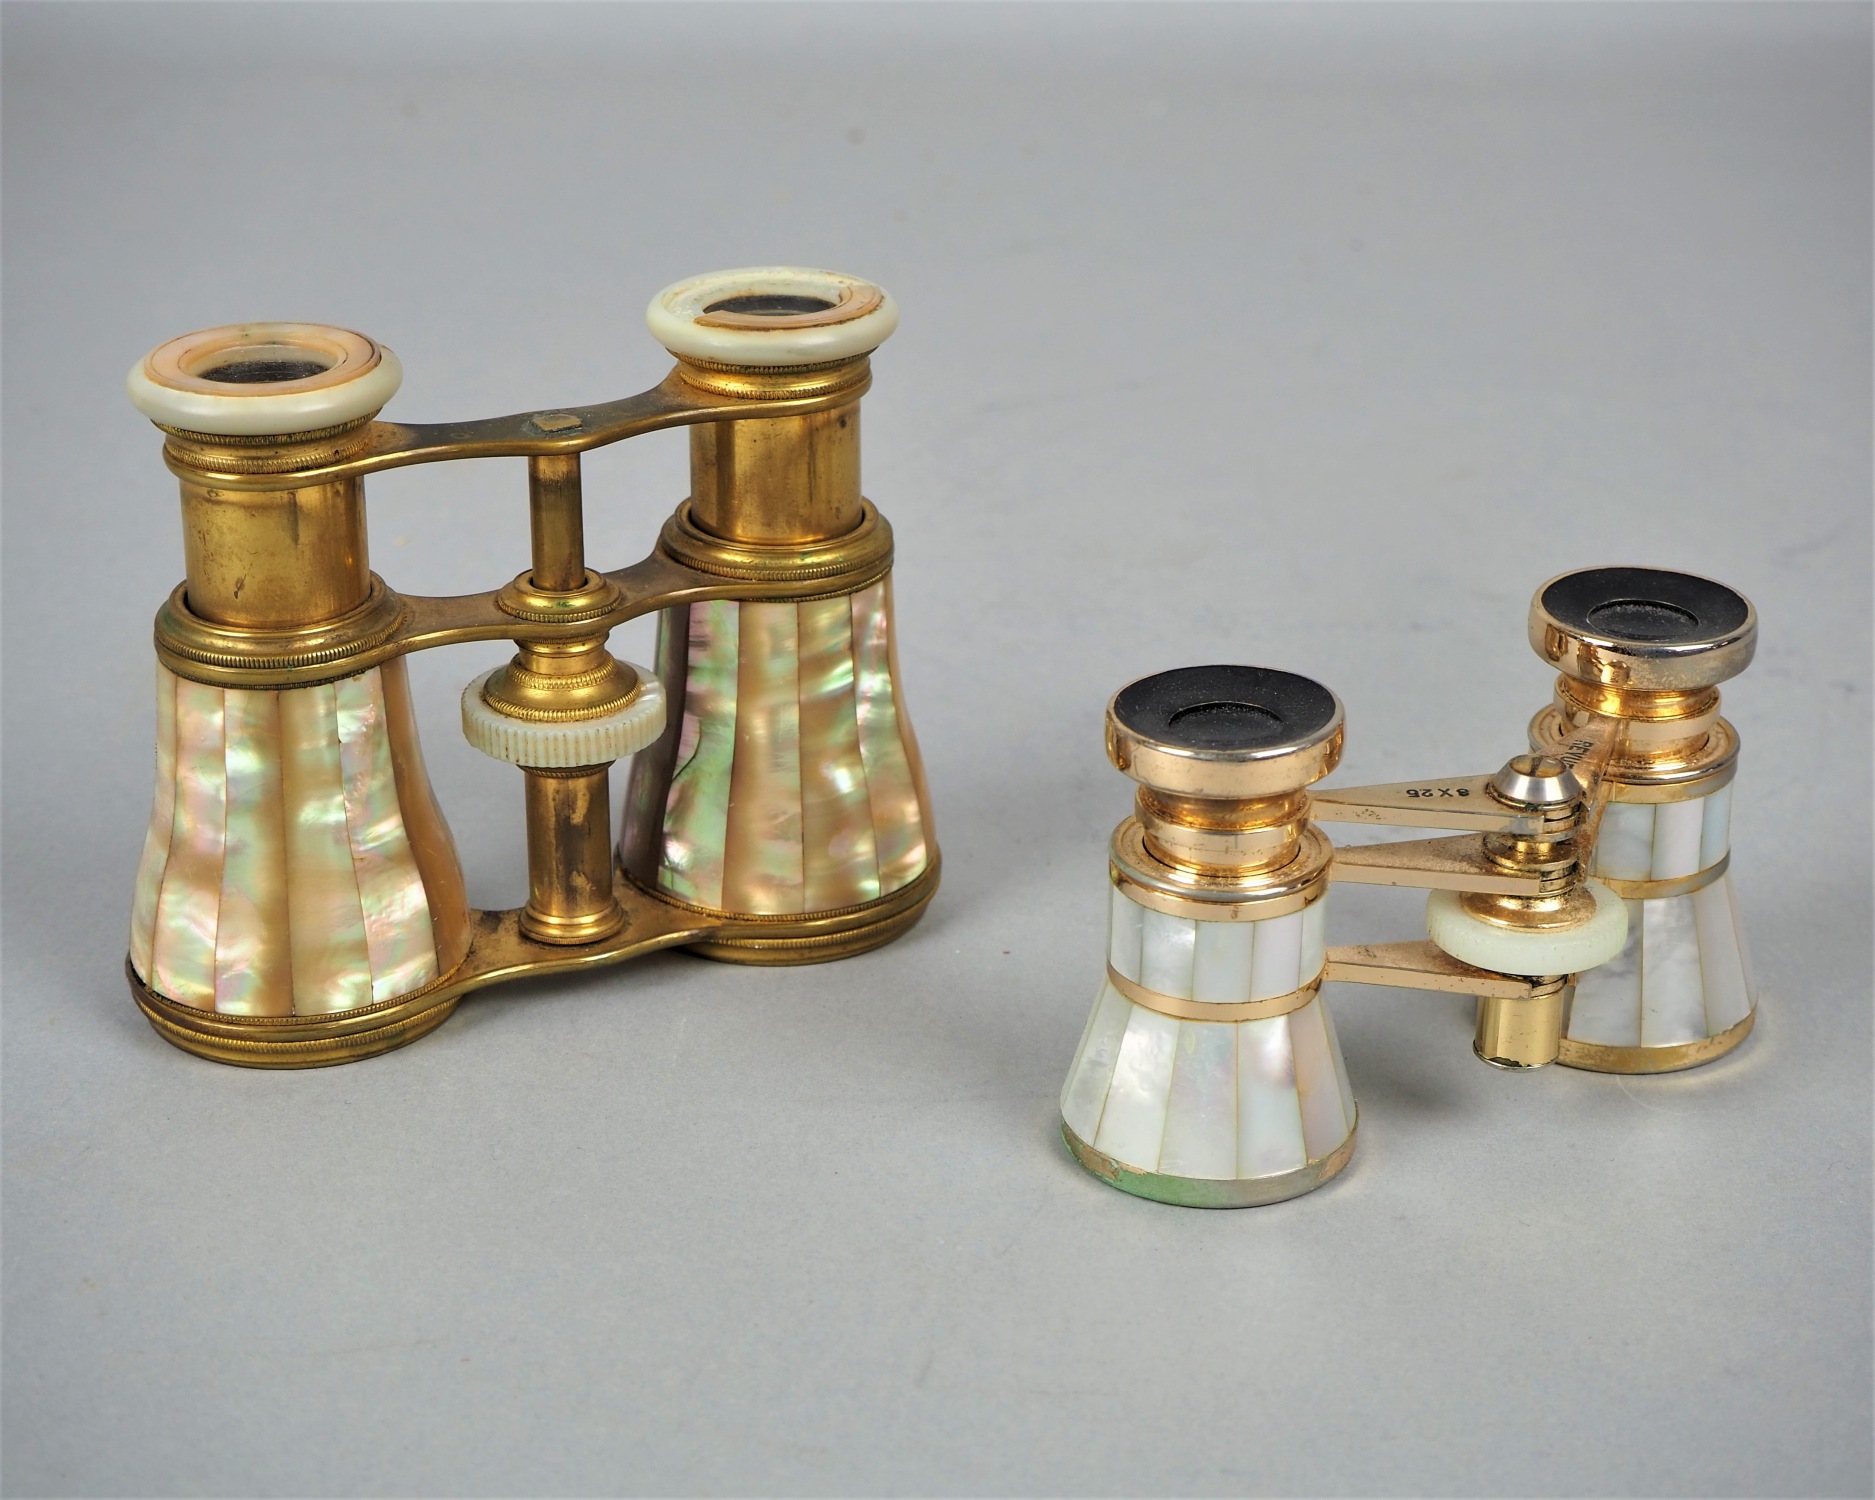 Two opera glasses with mother-of-pearl inlays, early 20th c.